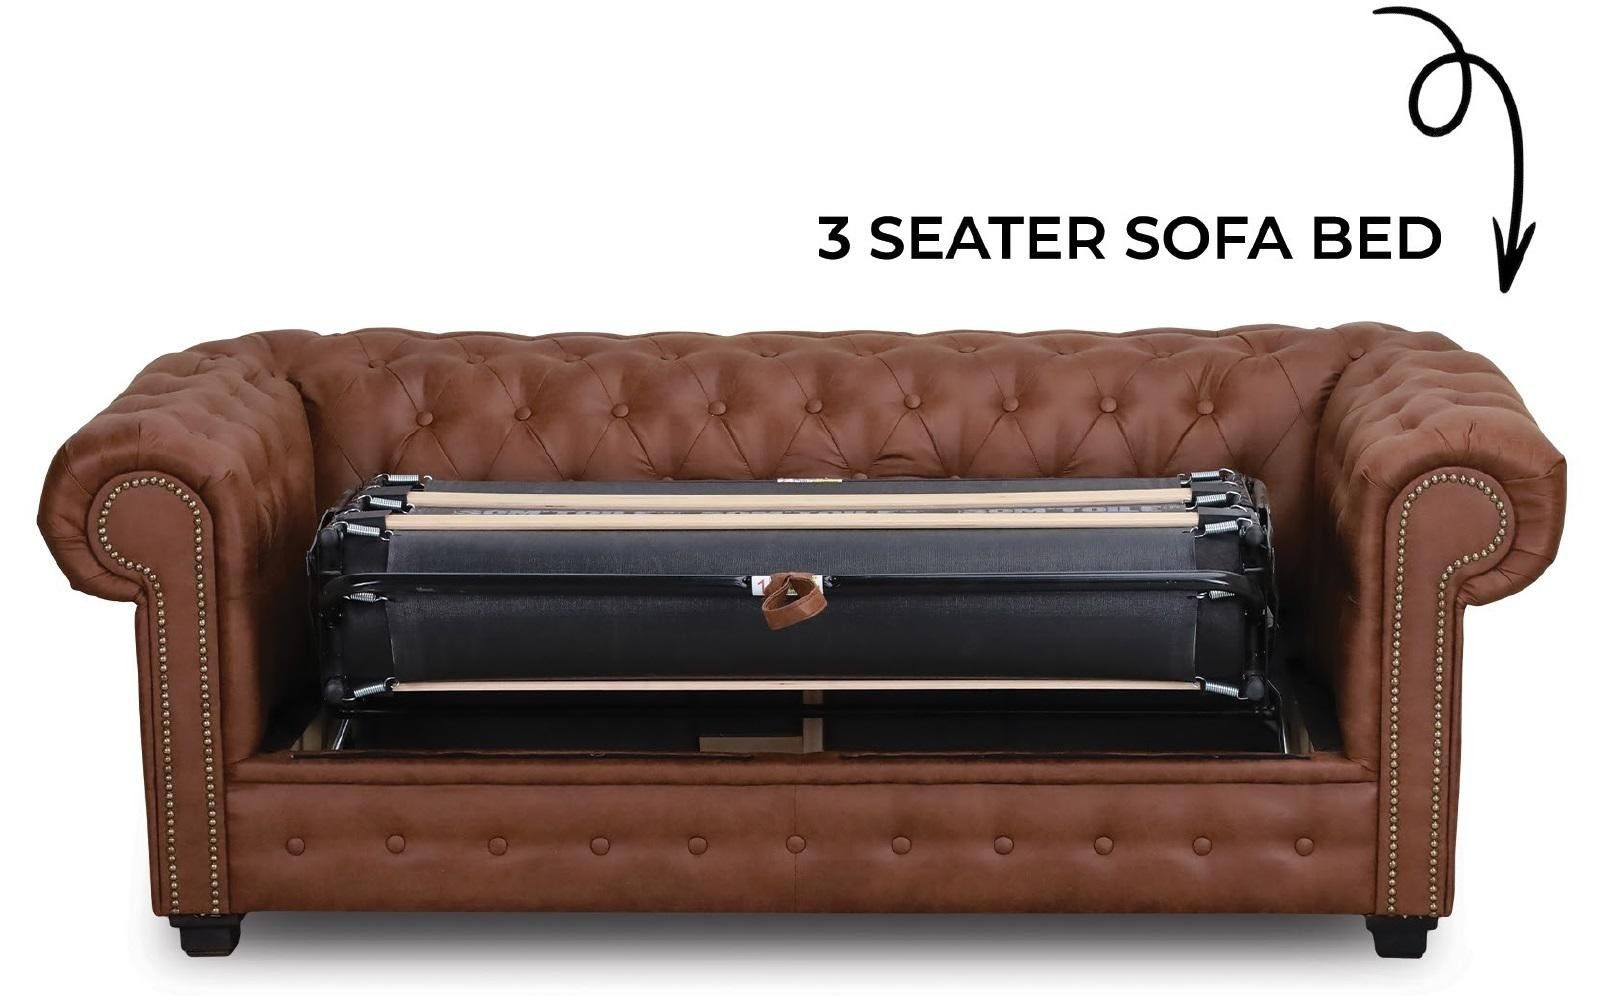 Sofa JVmoebel mit Schlafsofa, Polster Bettfunktion Made Chesterfield Europe Möbel Sofa in Couch